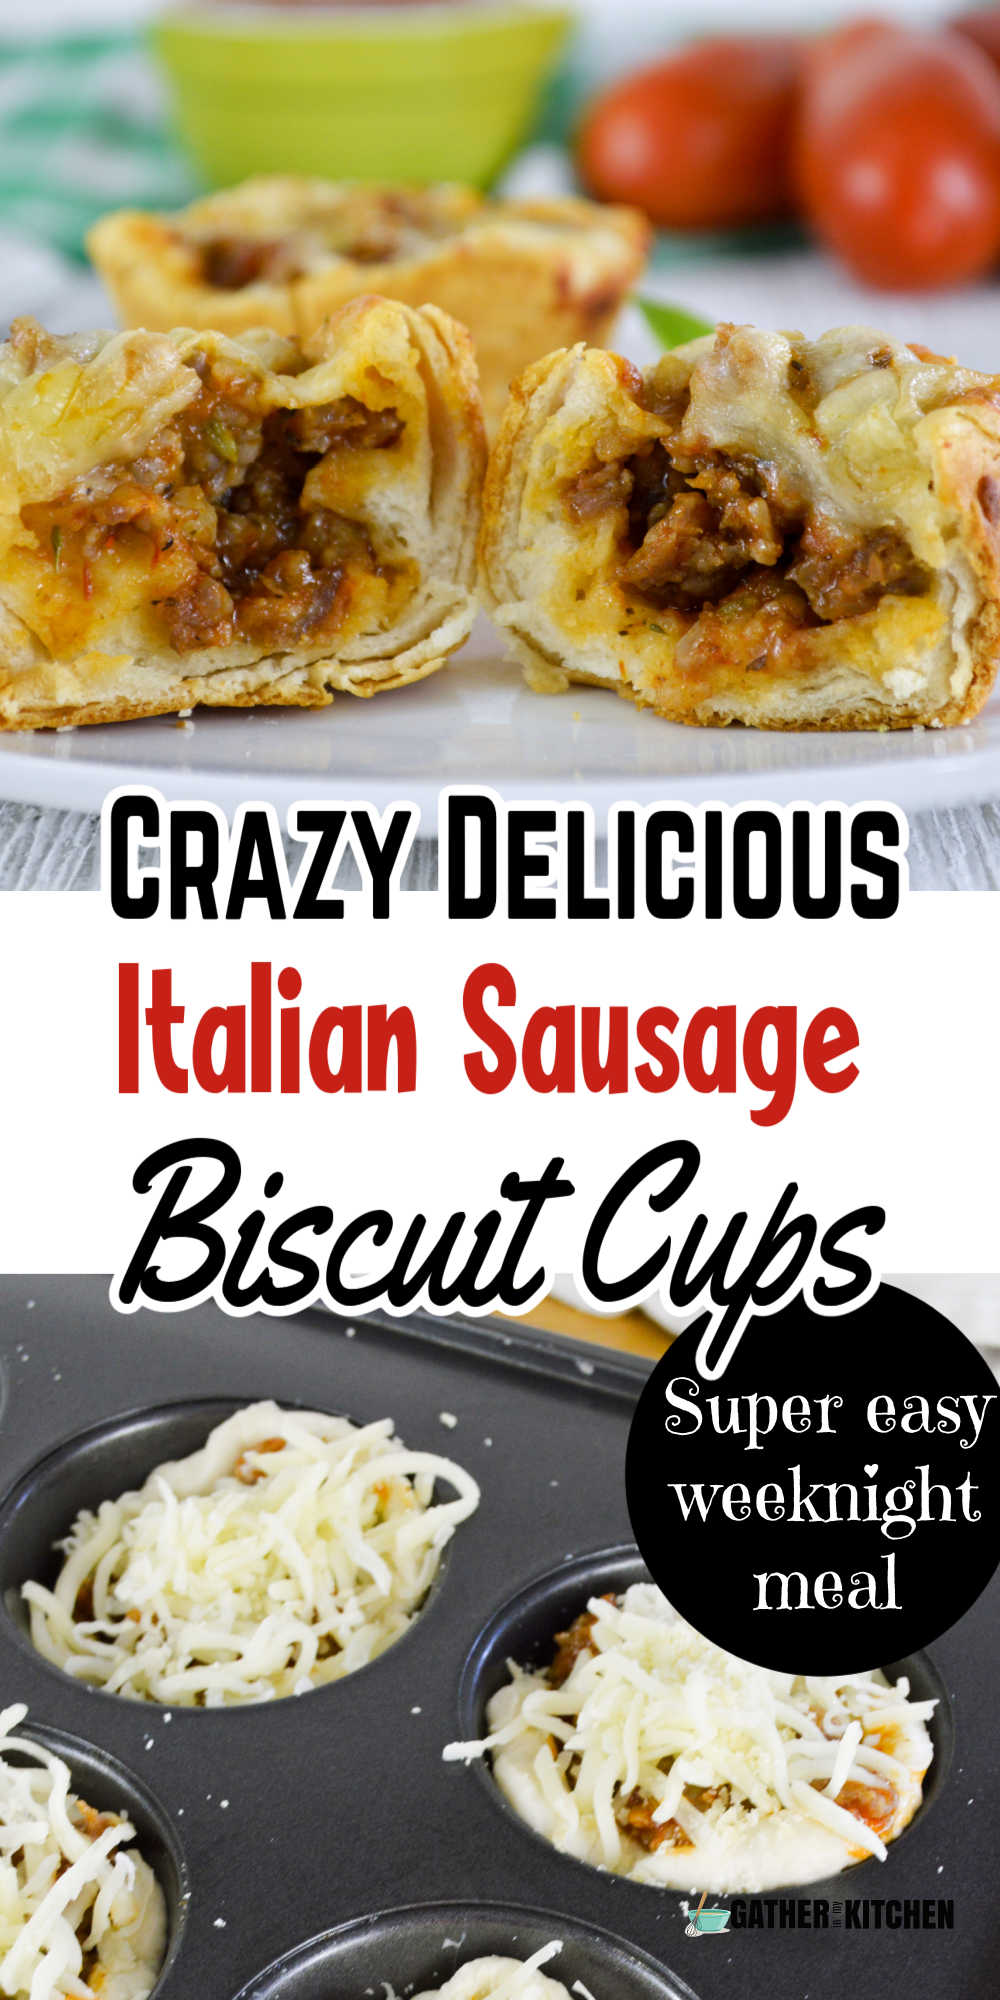 Pin image: top has a picture of the biscuit cups cup in half, middle says "Crazy delicious Italian Sausage Biscuit Cups: super easy weeknight meal" and bottom has the biscuit cups in the muffin tin.